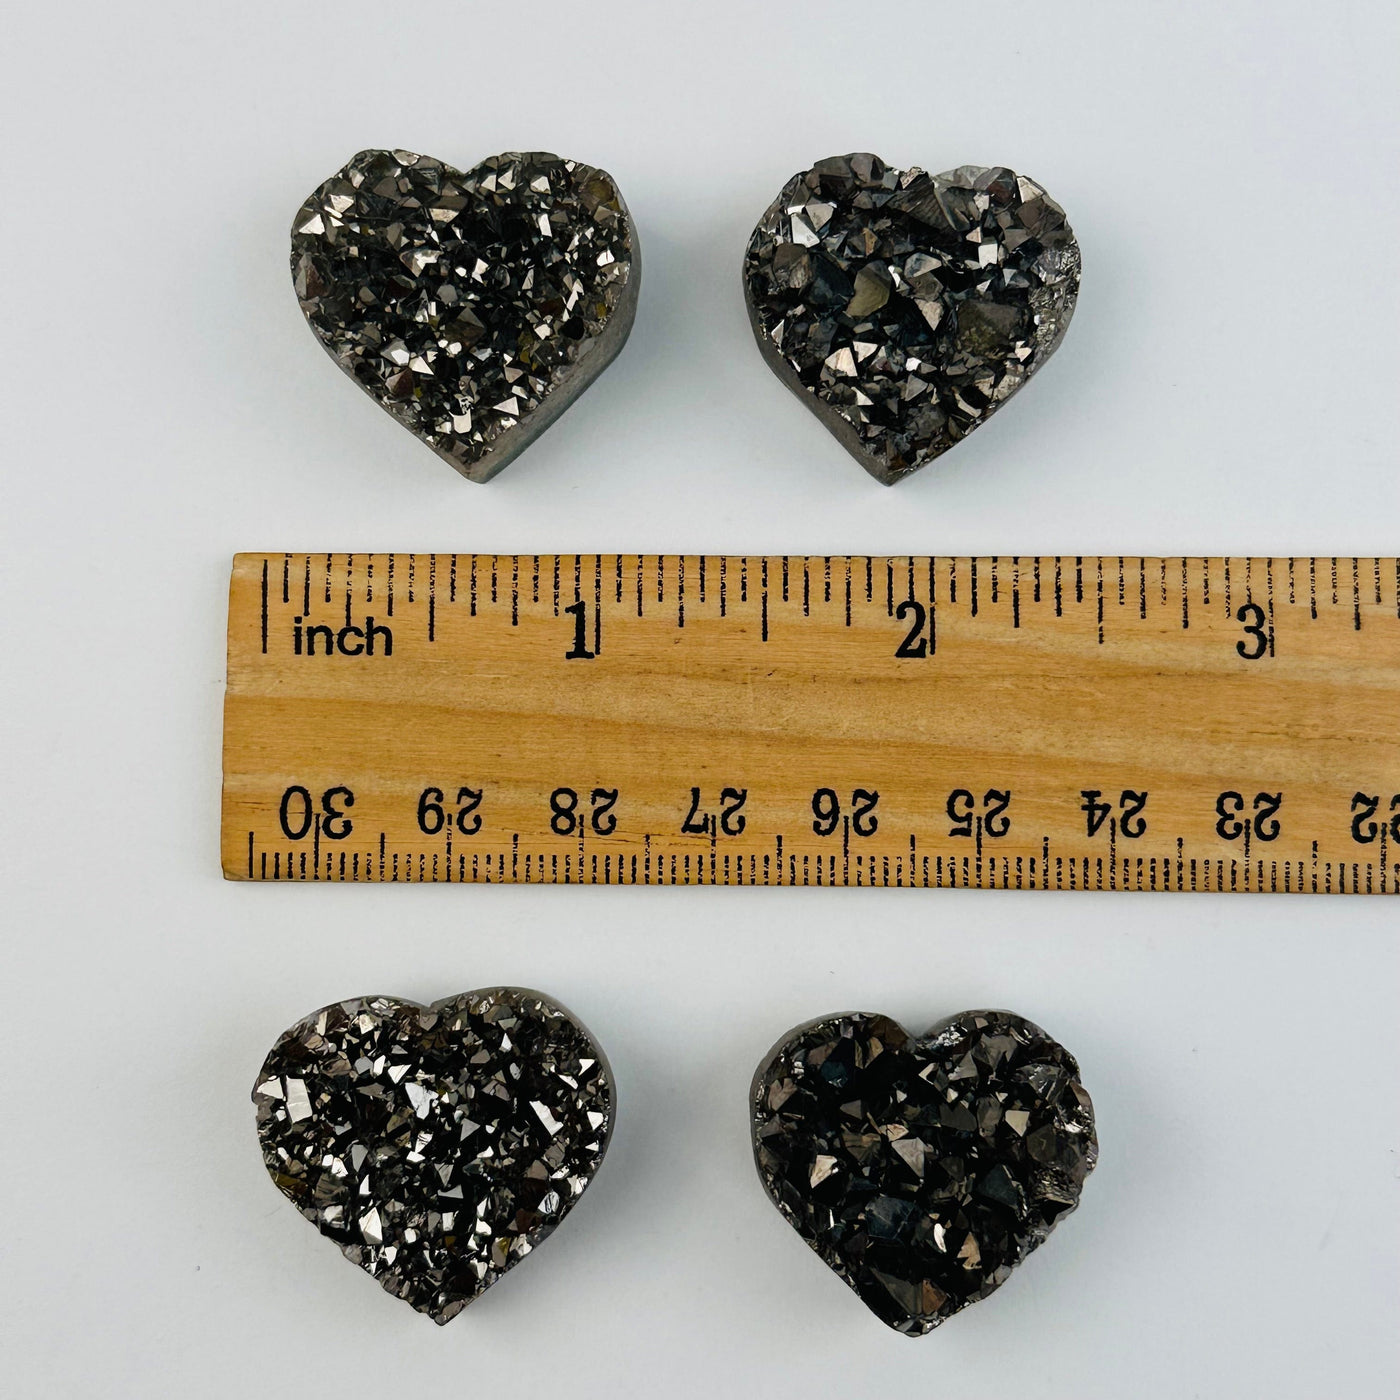 hearts next to a ruler for size reference 